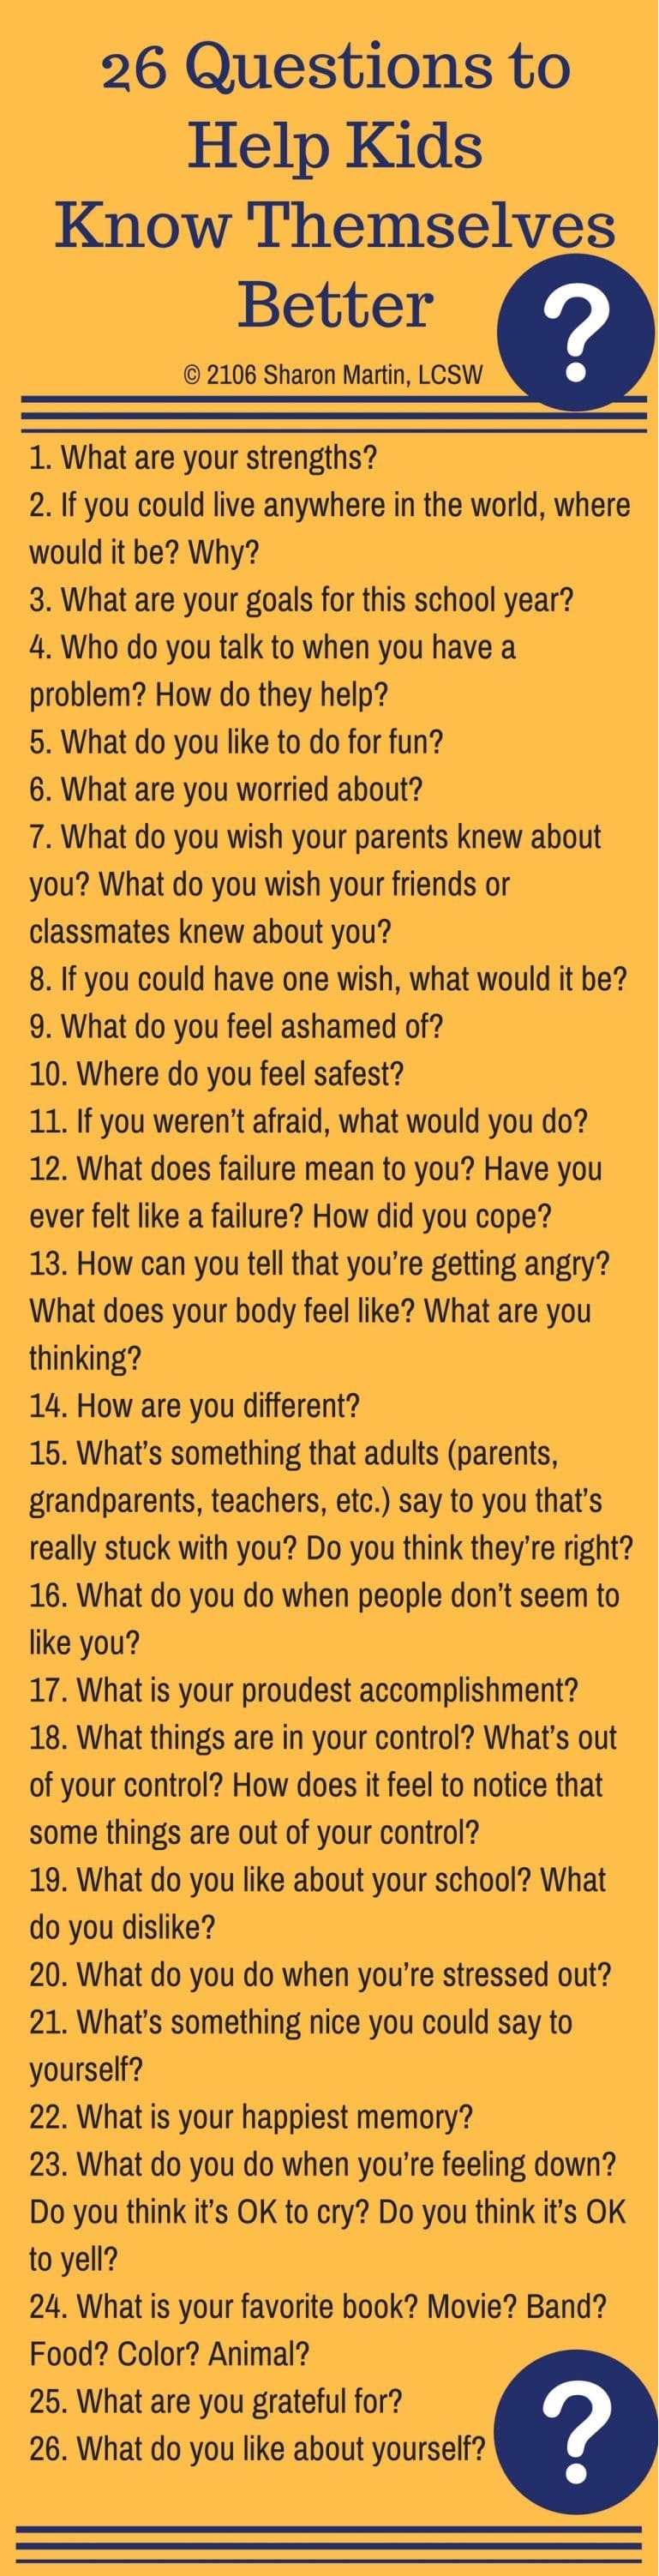 26 Questions to Help Kids Know Themselves Better